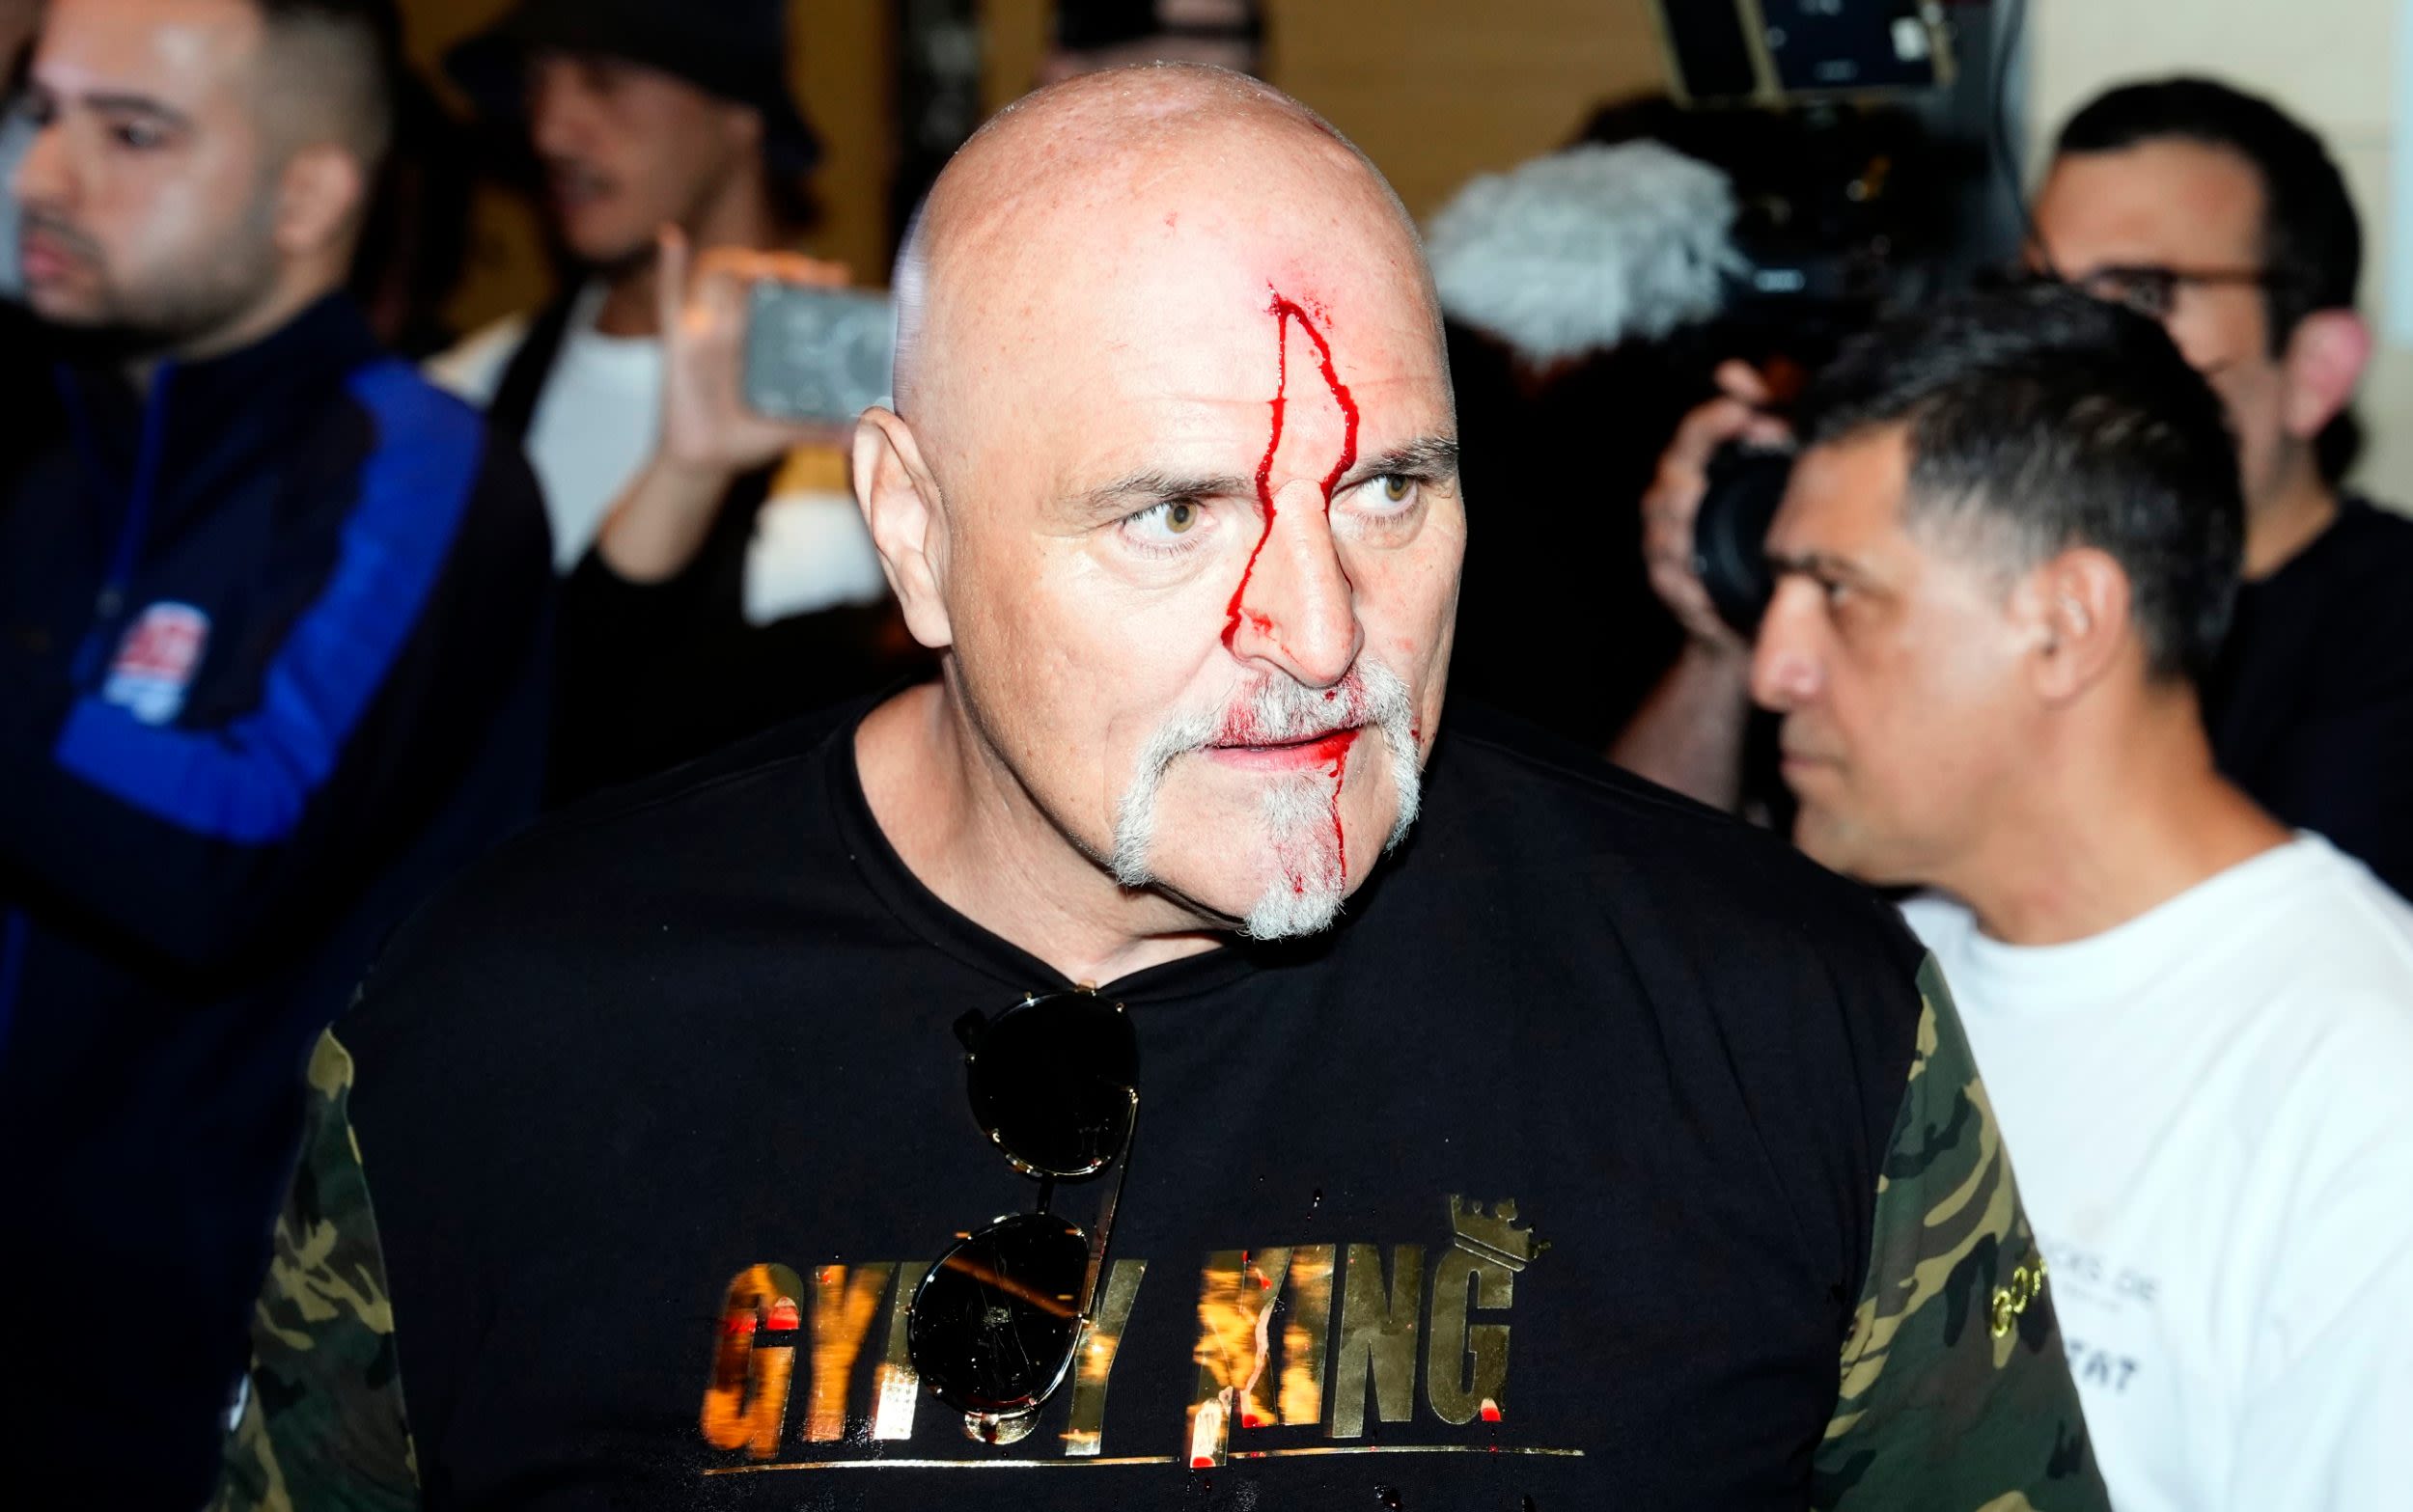 Watch: John Fury left bleeding after clash with Usyk’s team ahead of son Tyson’s unification fight